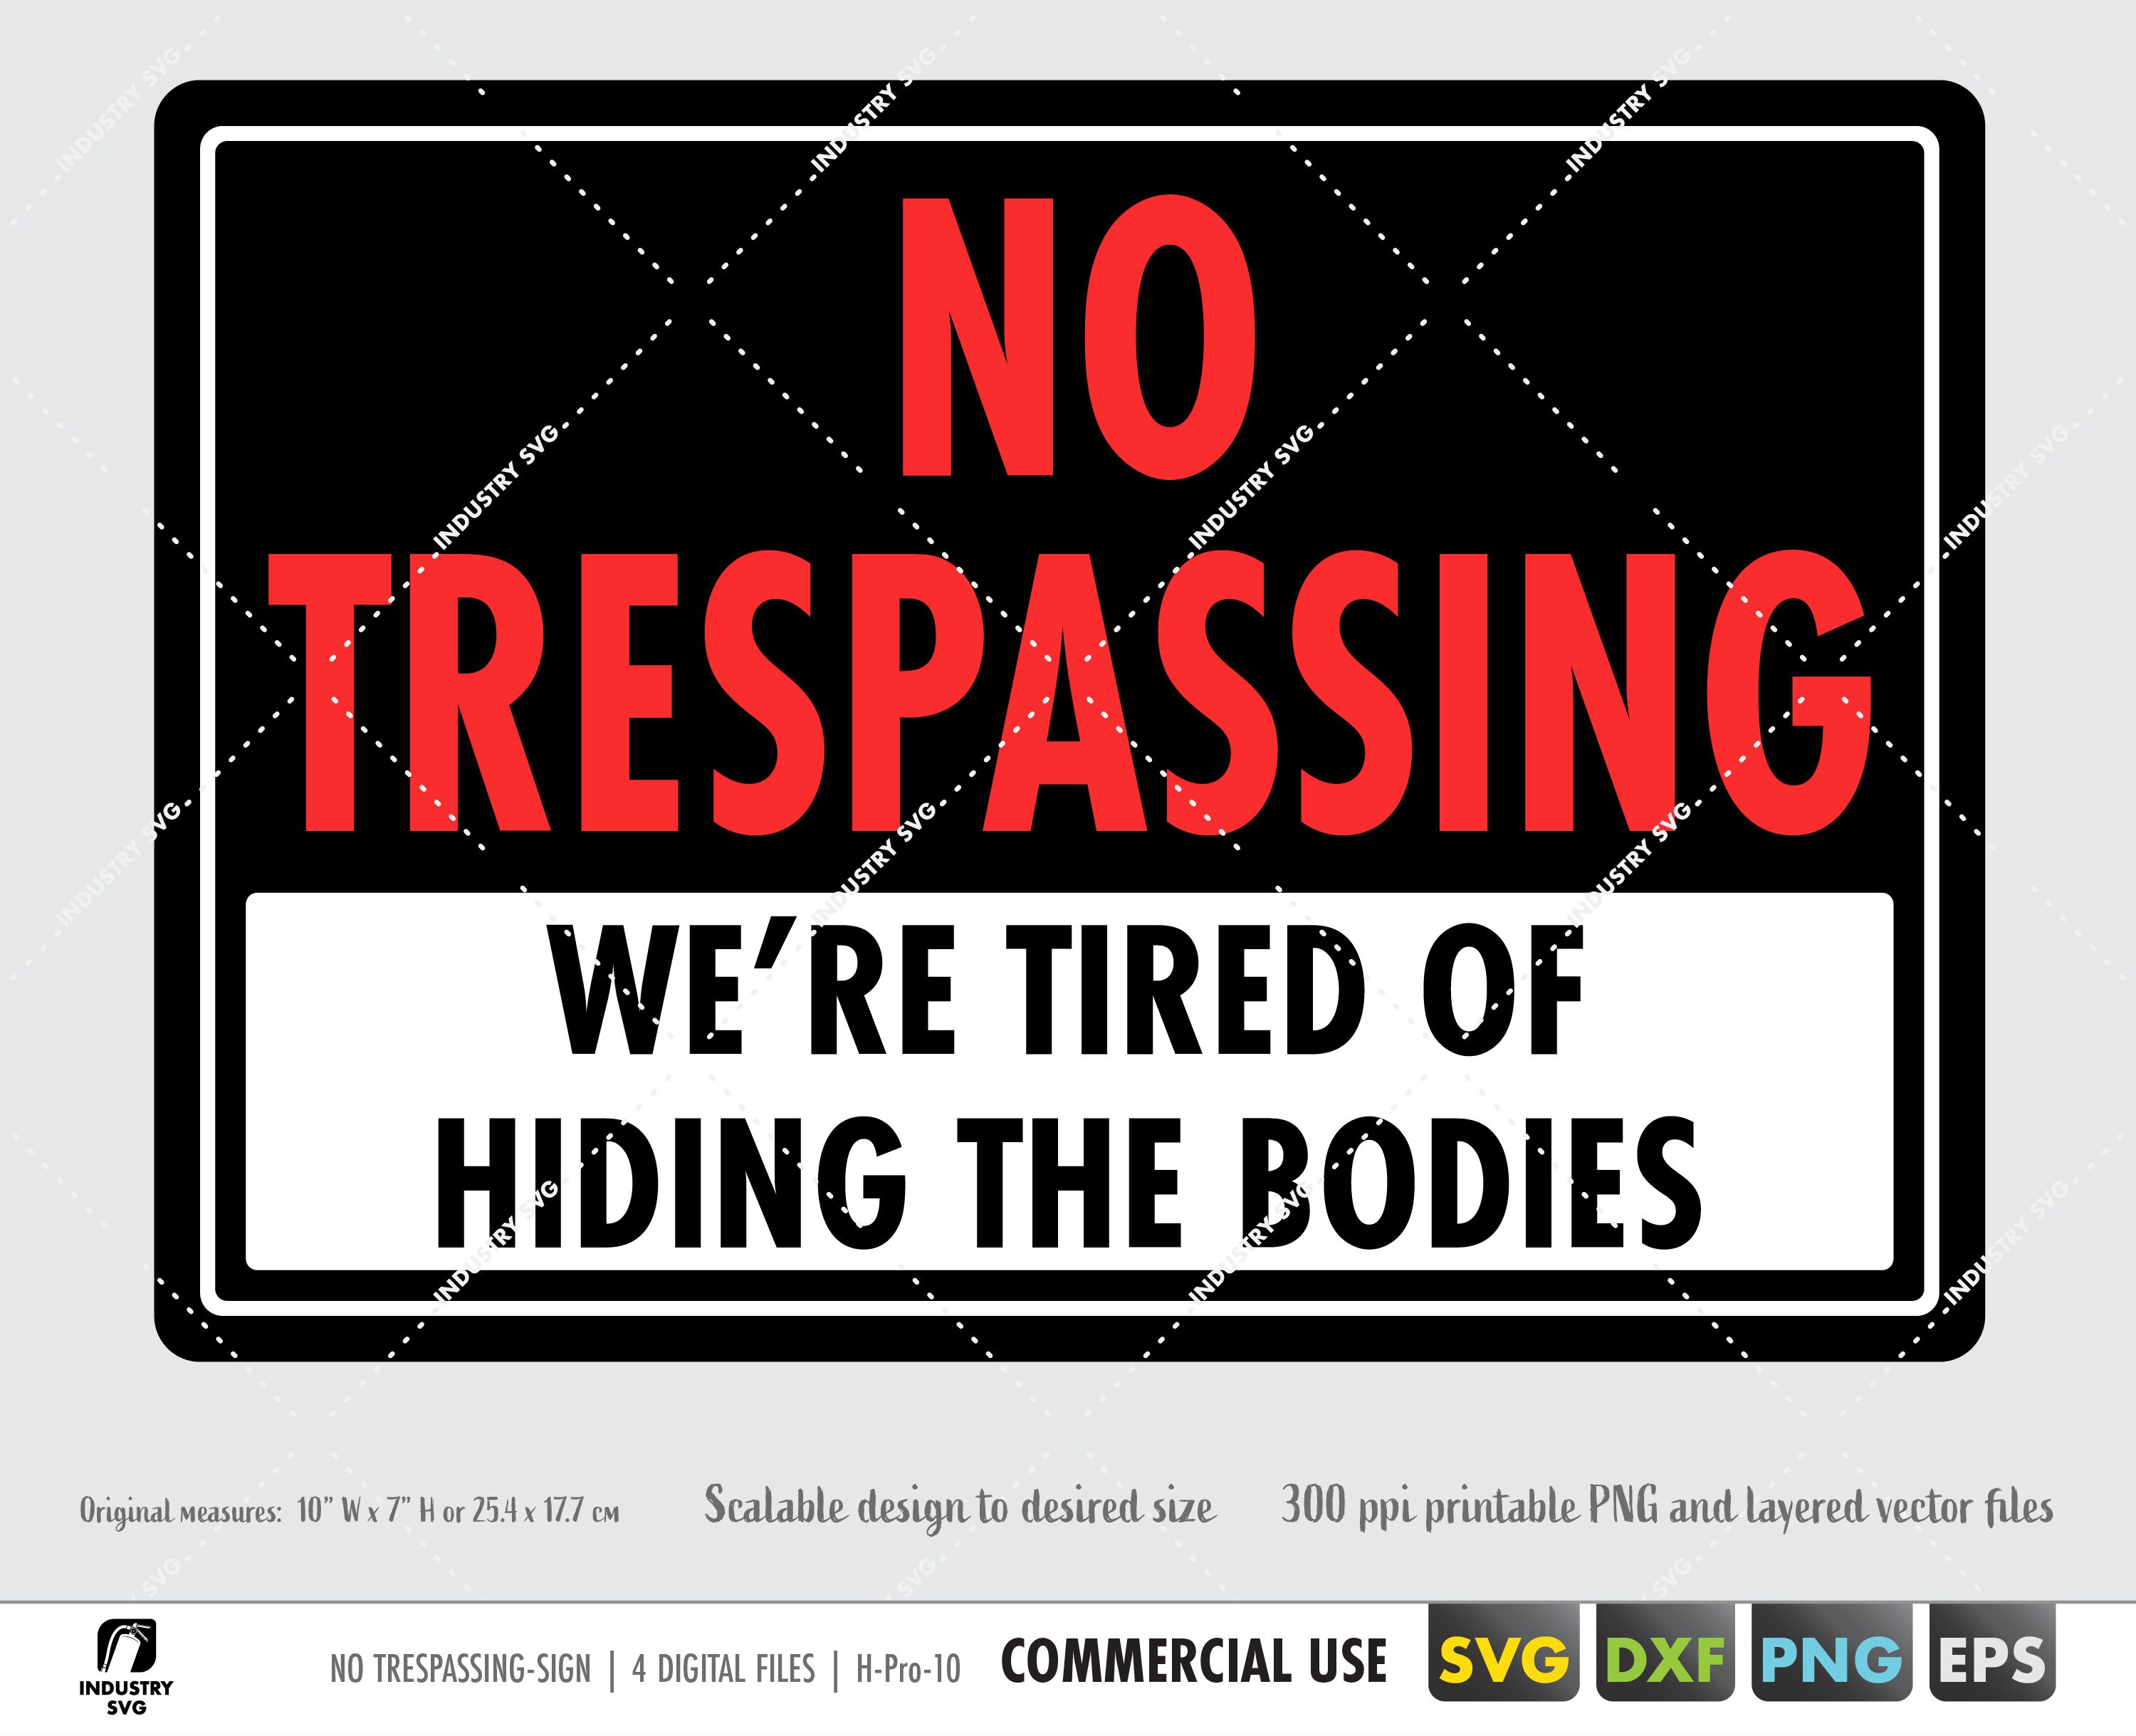 $2.89 FREE SHIPPING! NO TRESPASSING DECAL 1x9 Buy one get one FREE 